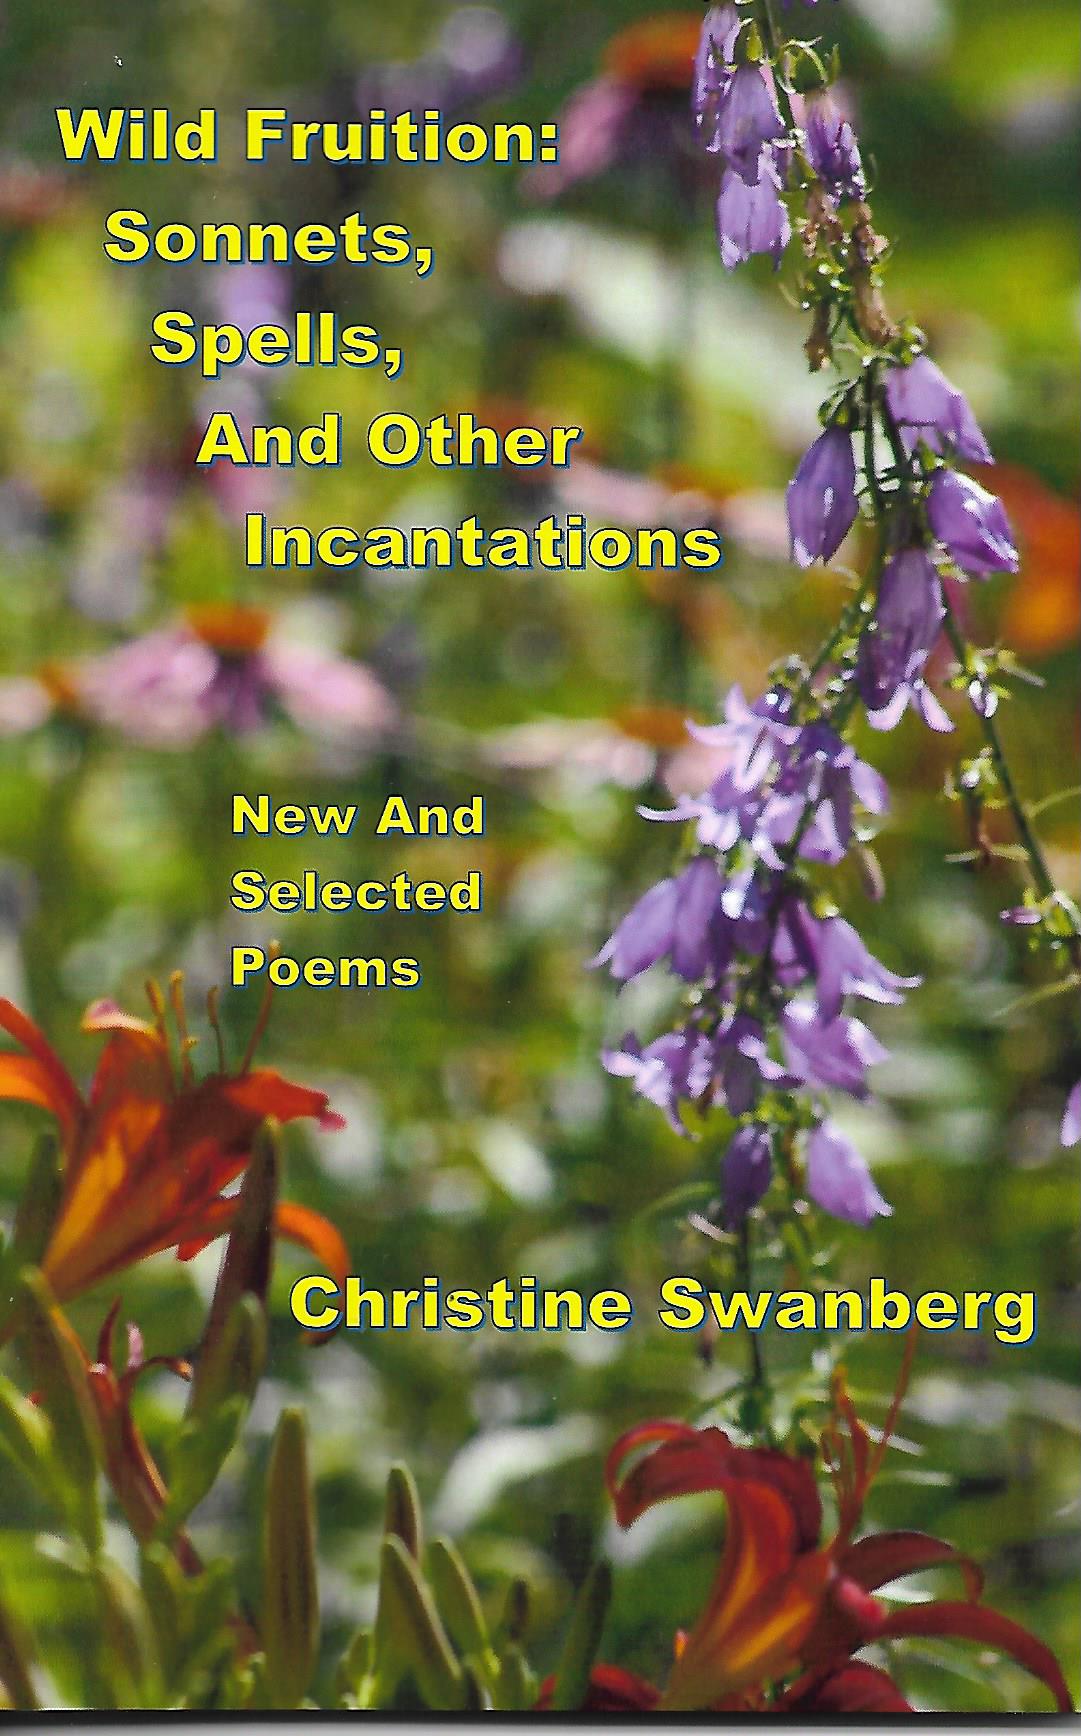 Wild Fruition: Sonnets, Spells, And Other Incantations by Christine Swanberg